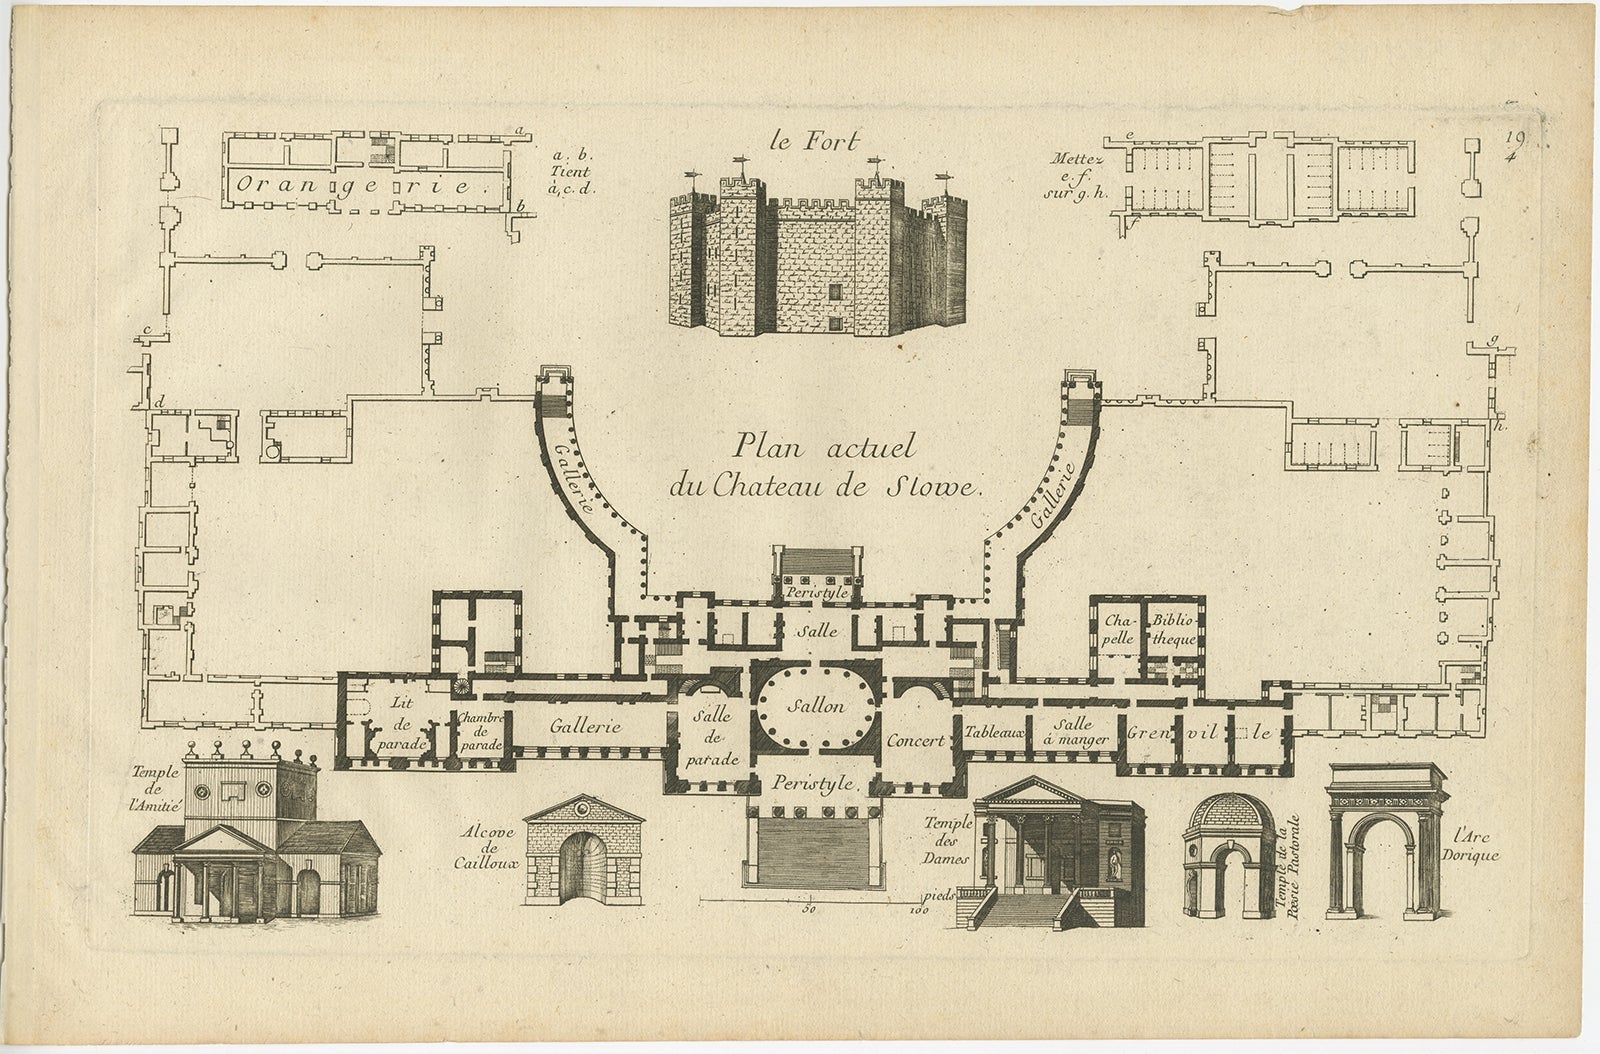 Antique print titled 'Plan actuel du Chateau de Stowe'. 

Copper engraving showing a plan and elements of the Stowe House. 

Stowe House is a grade I listed country house in Stowe, Buckinghamshire, England. It is the home of Stowe School, an